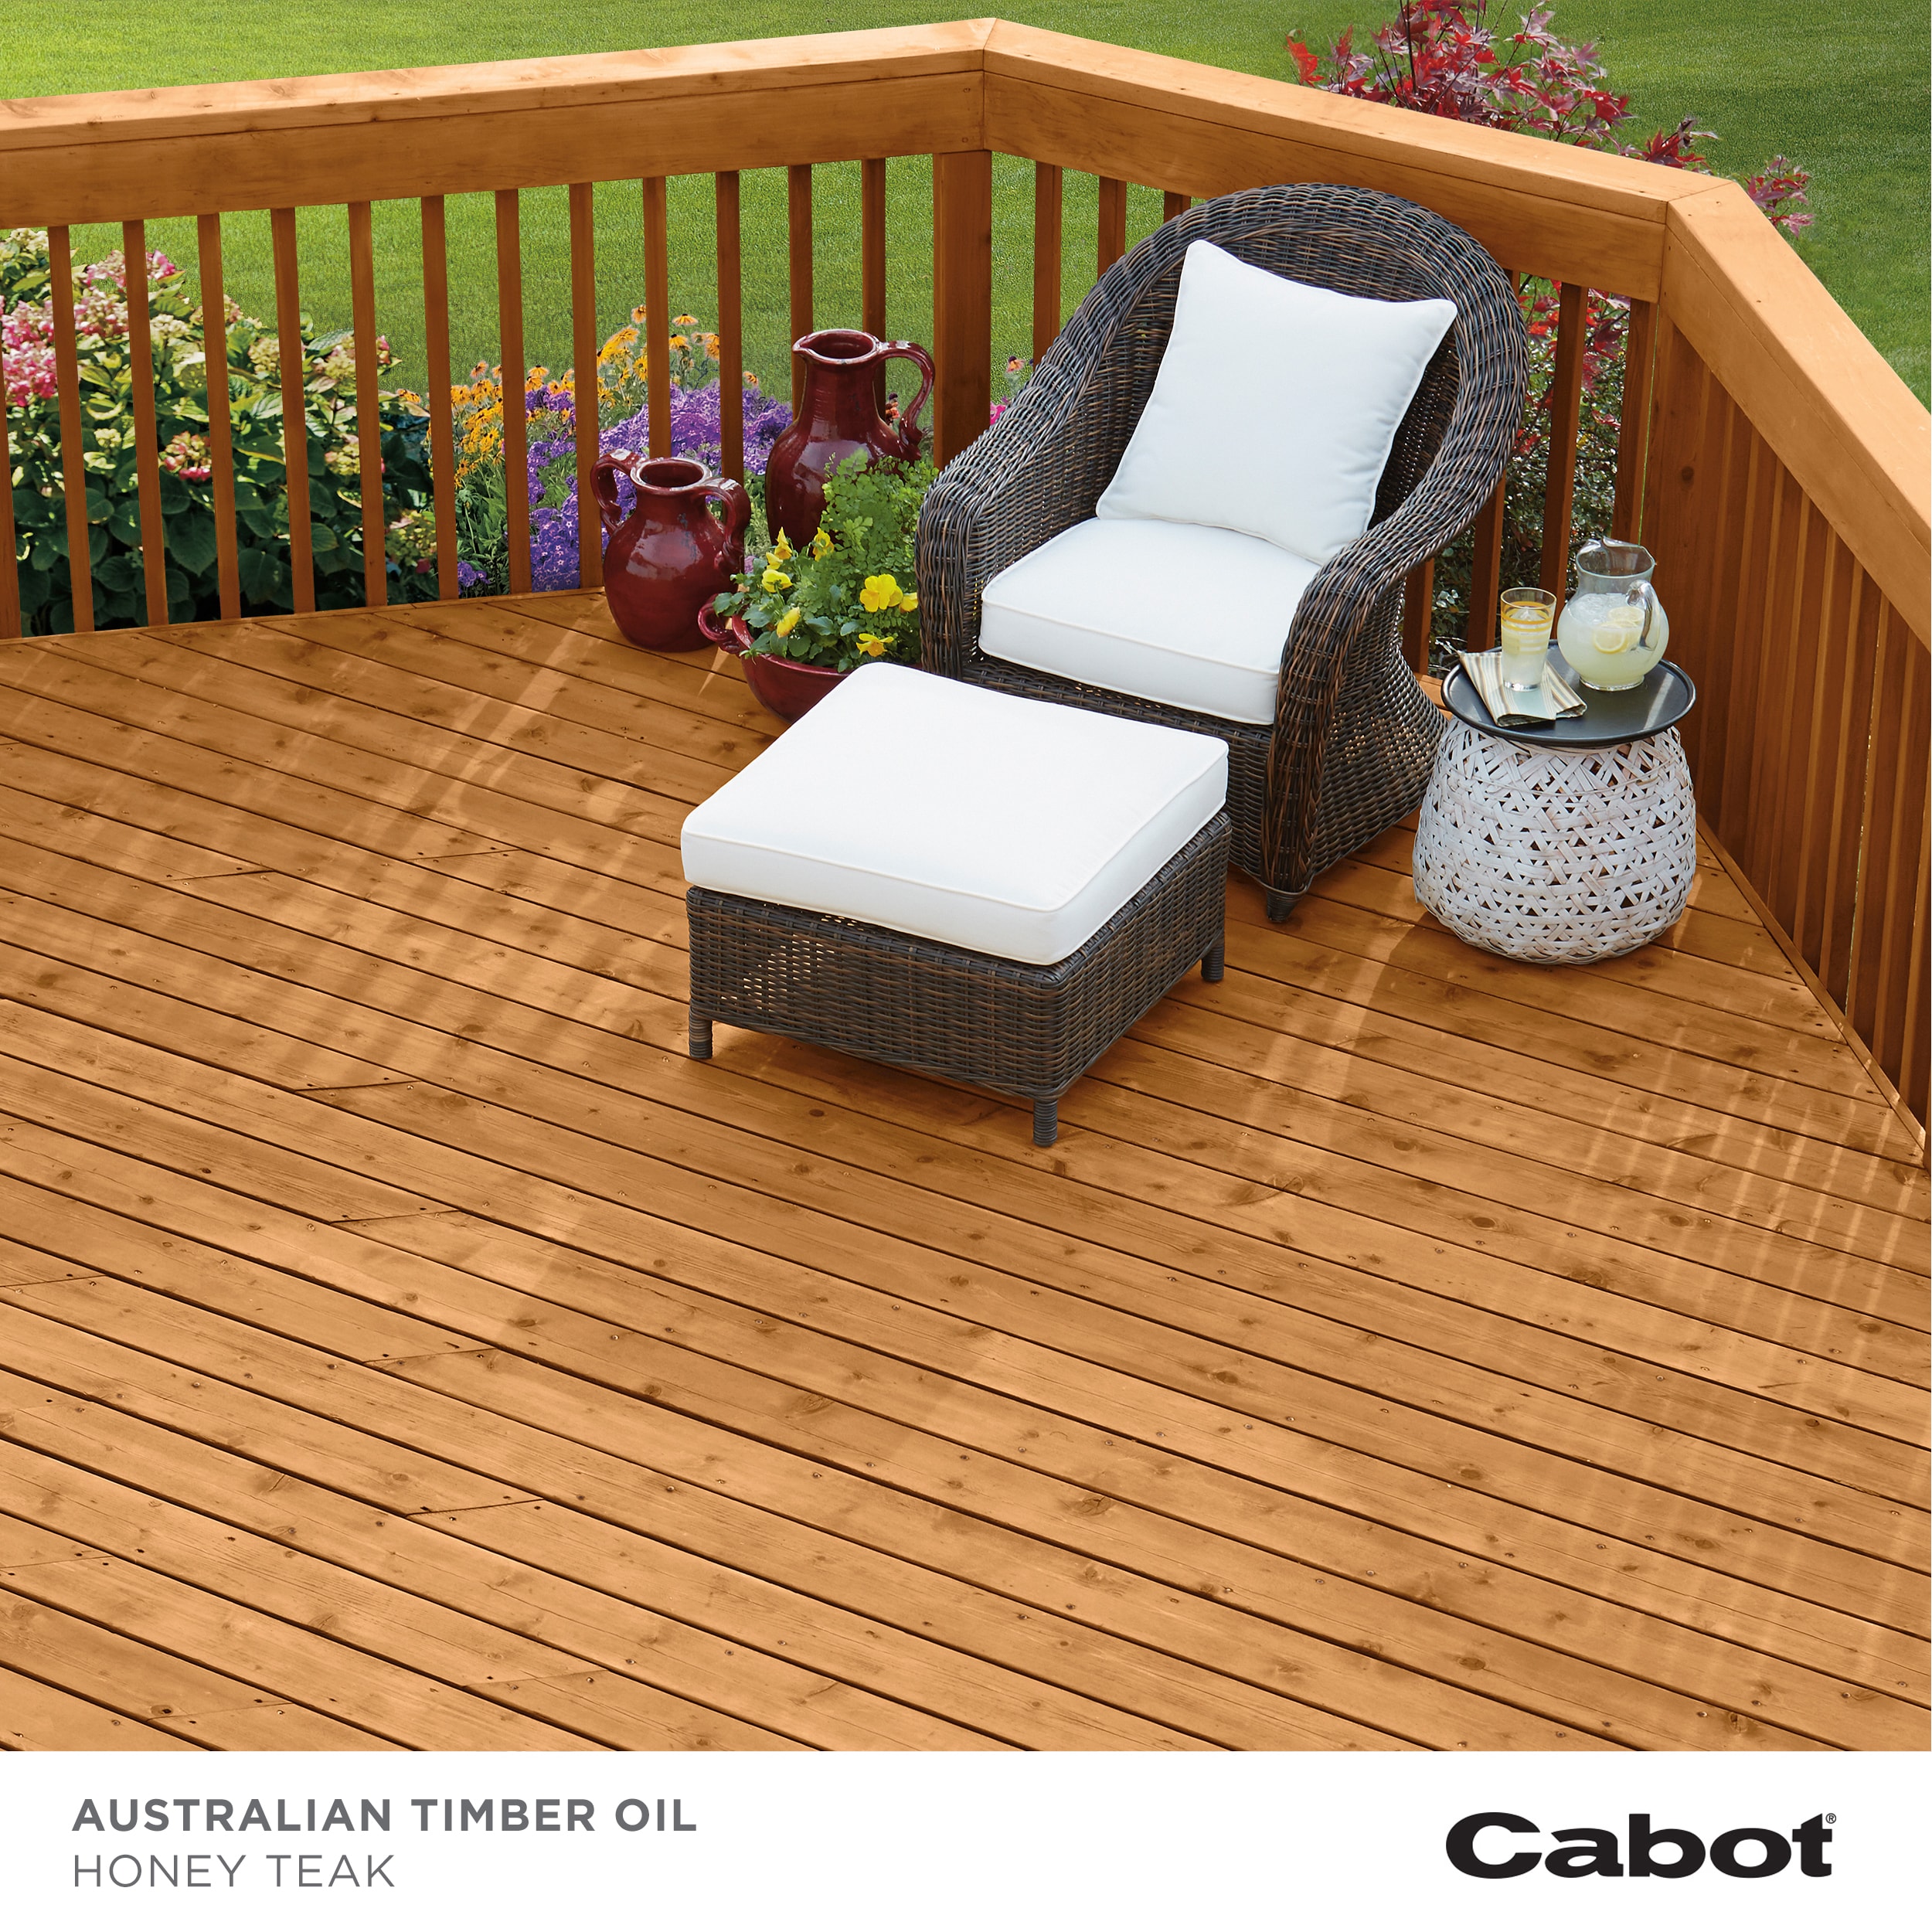 Can You Stain Teak Wood Fences and Furniture? - Teak & Deck